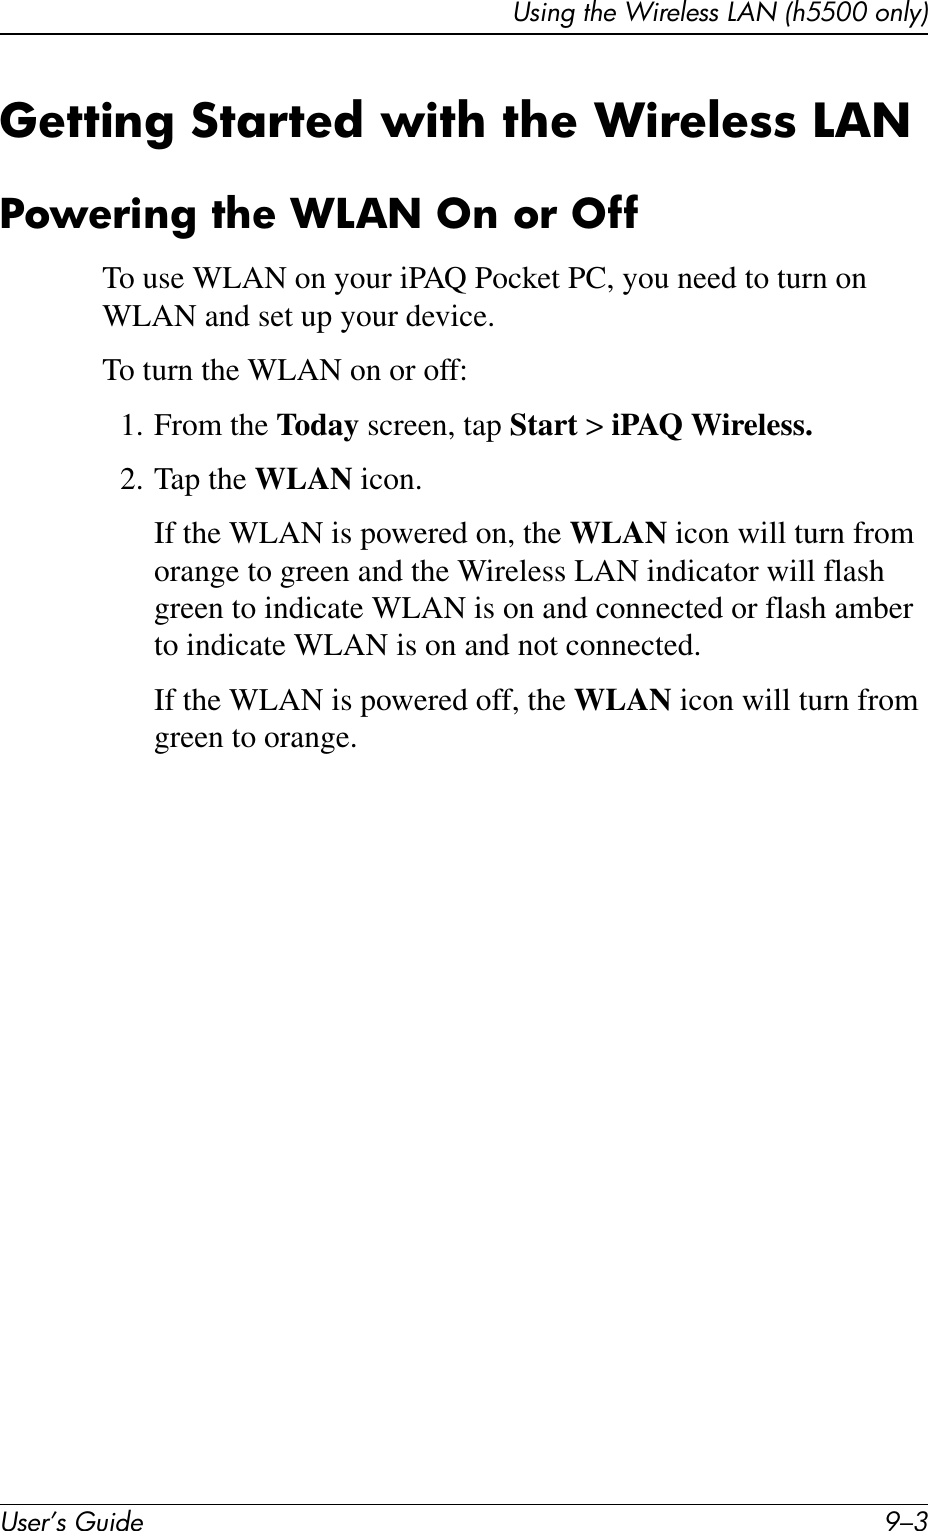 Using the Wireless LAN (h5500 only)User’s Guide 9–3Getting Started with the Wireless LANPowering the WLAN On or OffTo use WLAN on your iPAQ Pocket PC, you need to turn on WLAN and set up your device.To turn the WLAN on or off:1. From the Today screen, tap Start &gt; iPAQ Wireless.2. Tap the WLAN icon.If the WLAN is powered on, the WLAN icon will turn from orange to green and the Wireless LAN indicator will flash green to indicate WLAN is on and connected or flash amber to indicate WLAN is on and not connected.If the WLAN is powered off, the WLAN icon will turn from green to orange.